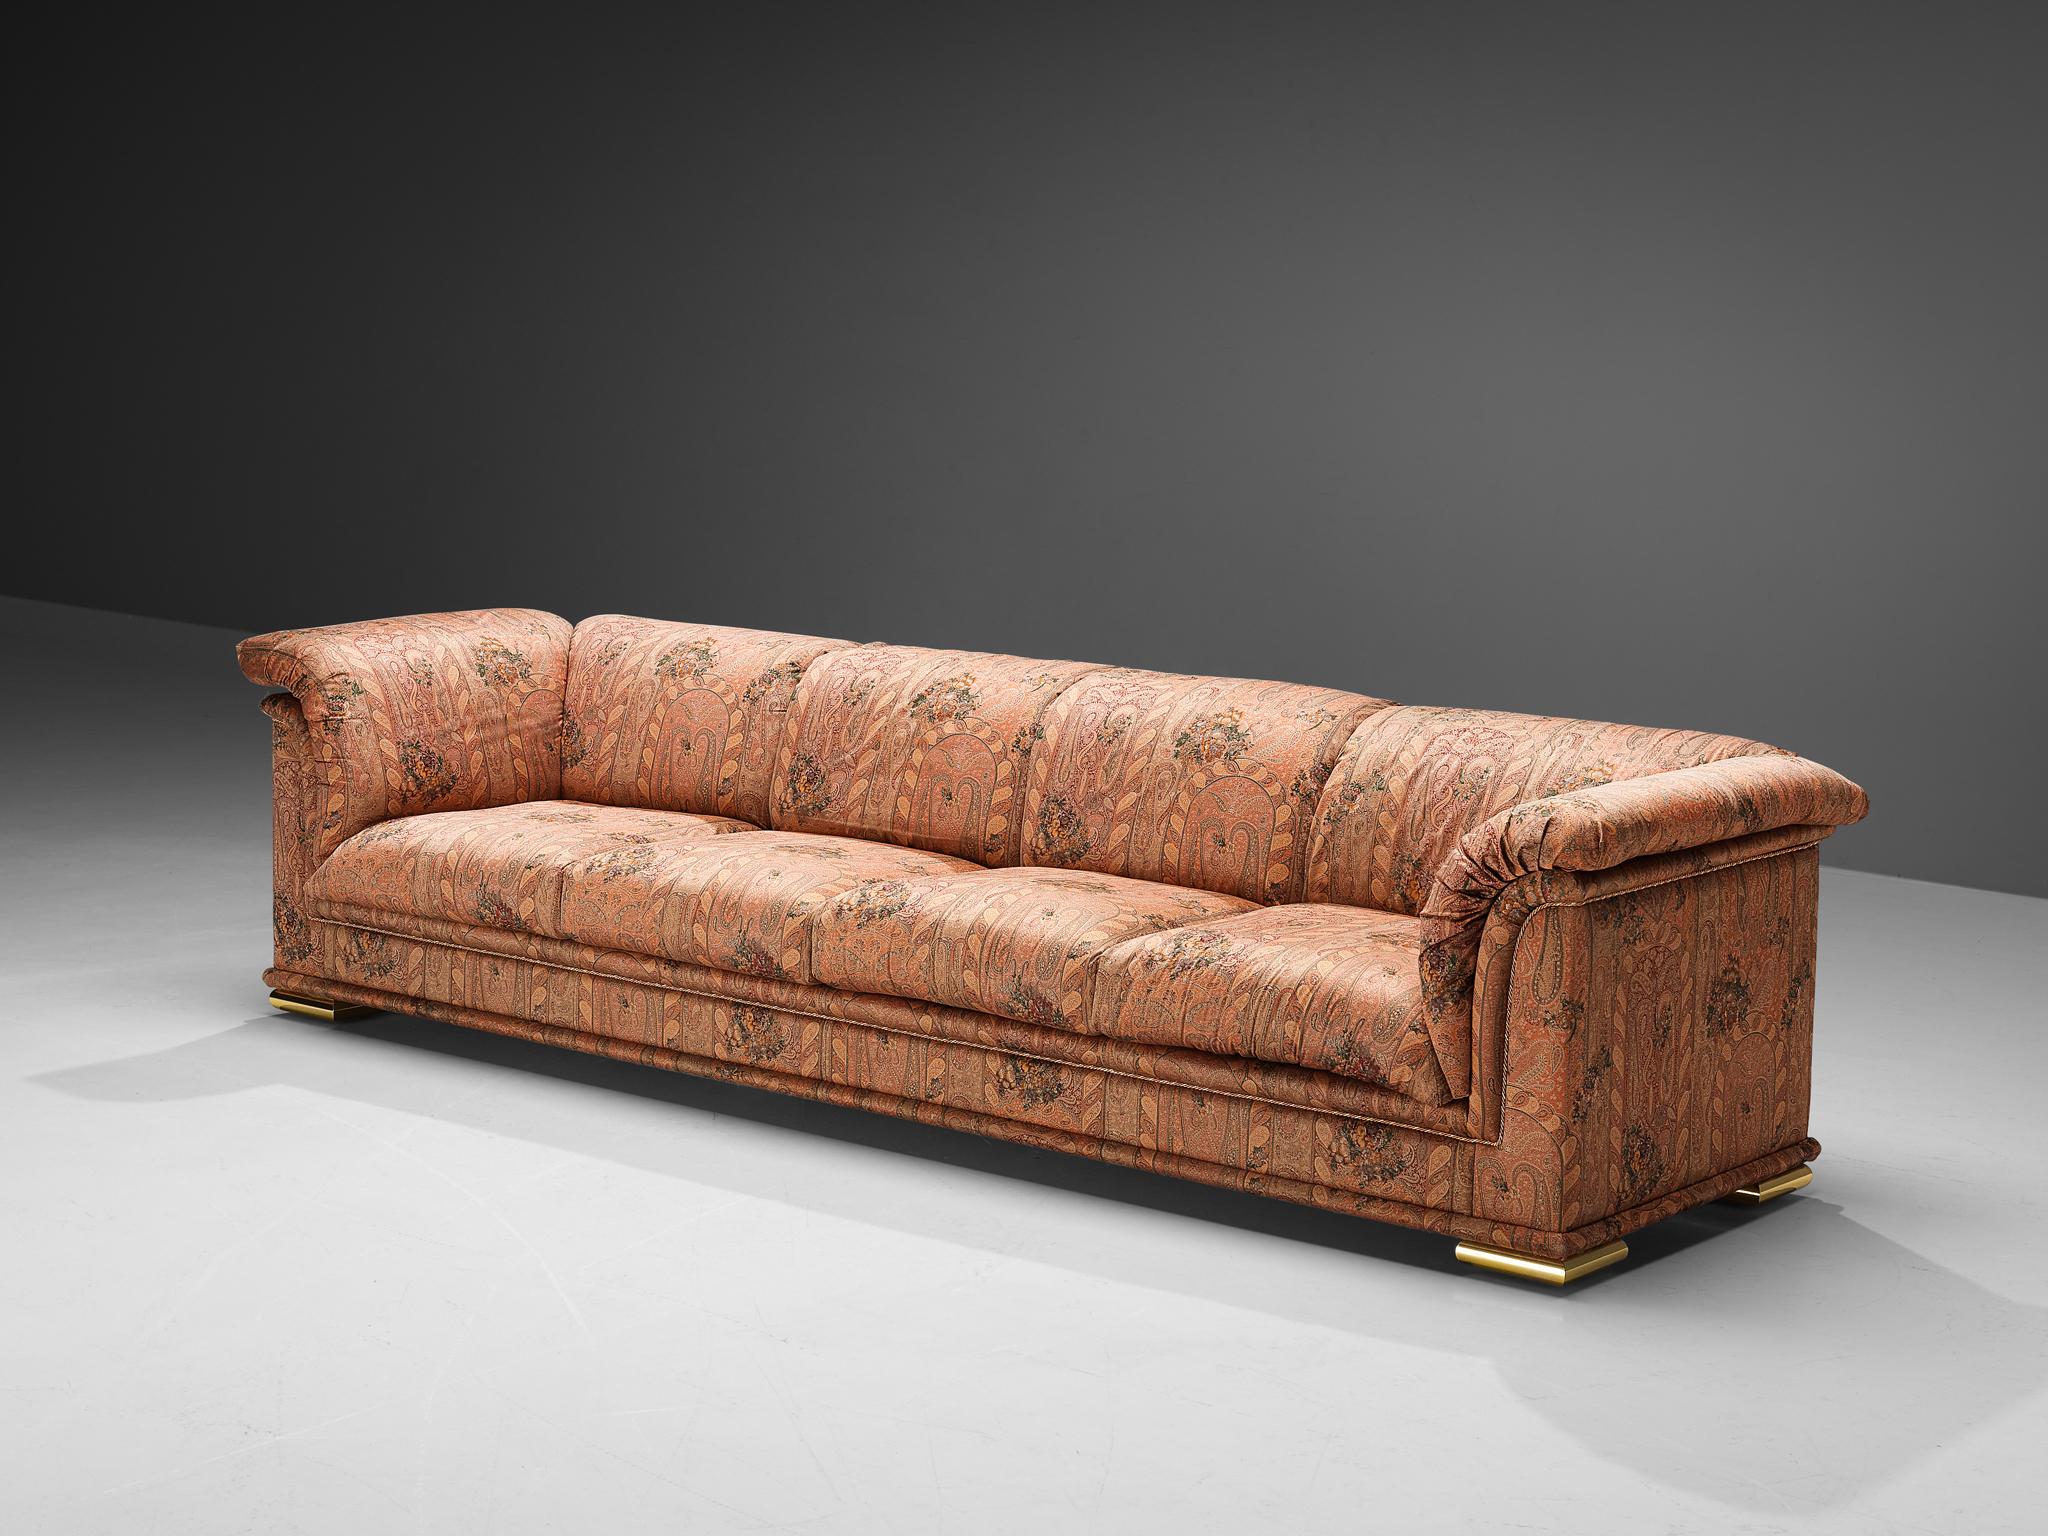 Sofa, fabric, metal, Italy, 1970s. 

Magnificent four seater sofa executed in a lively paisley print fabric upholstery. The satin weave of the fabric enlarges the alluring feeling this grand sofa radiates. The bulky stuffing of the seating and